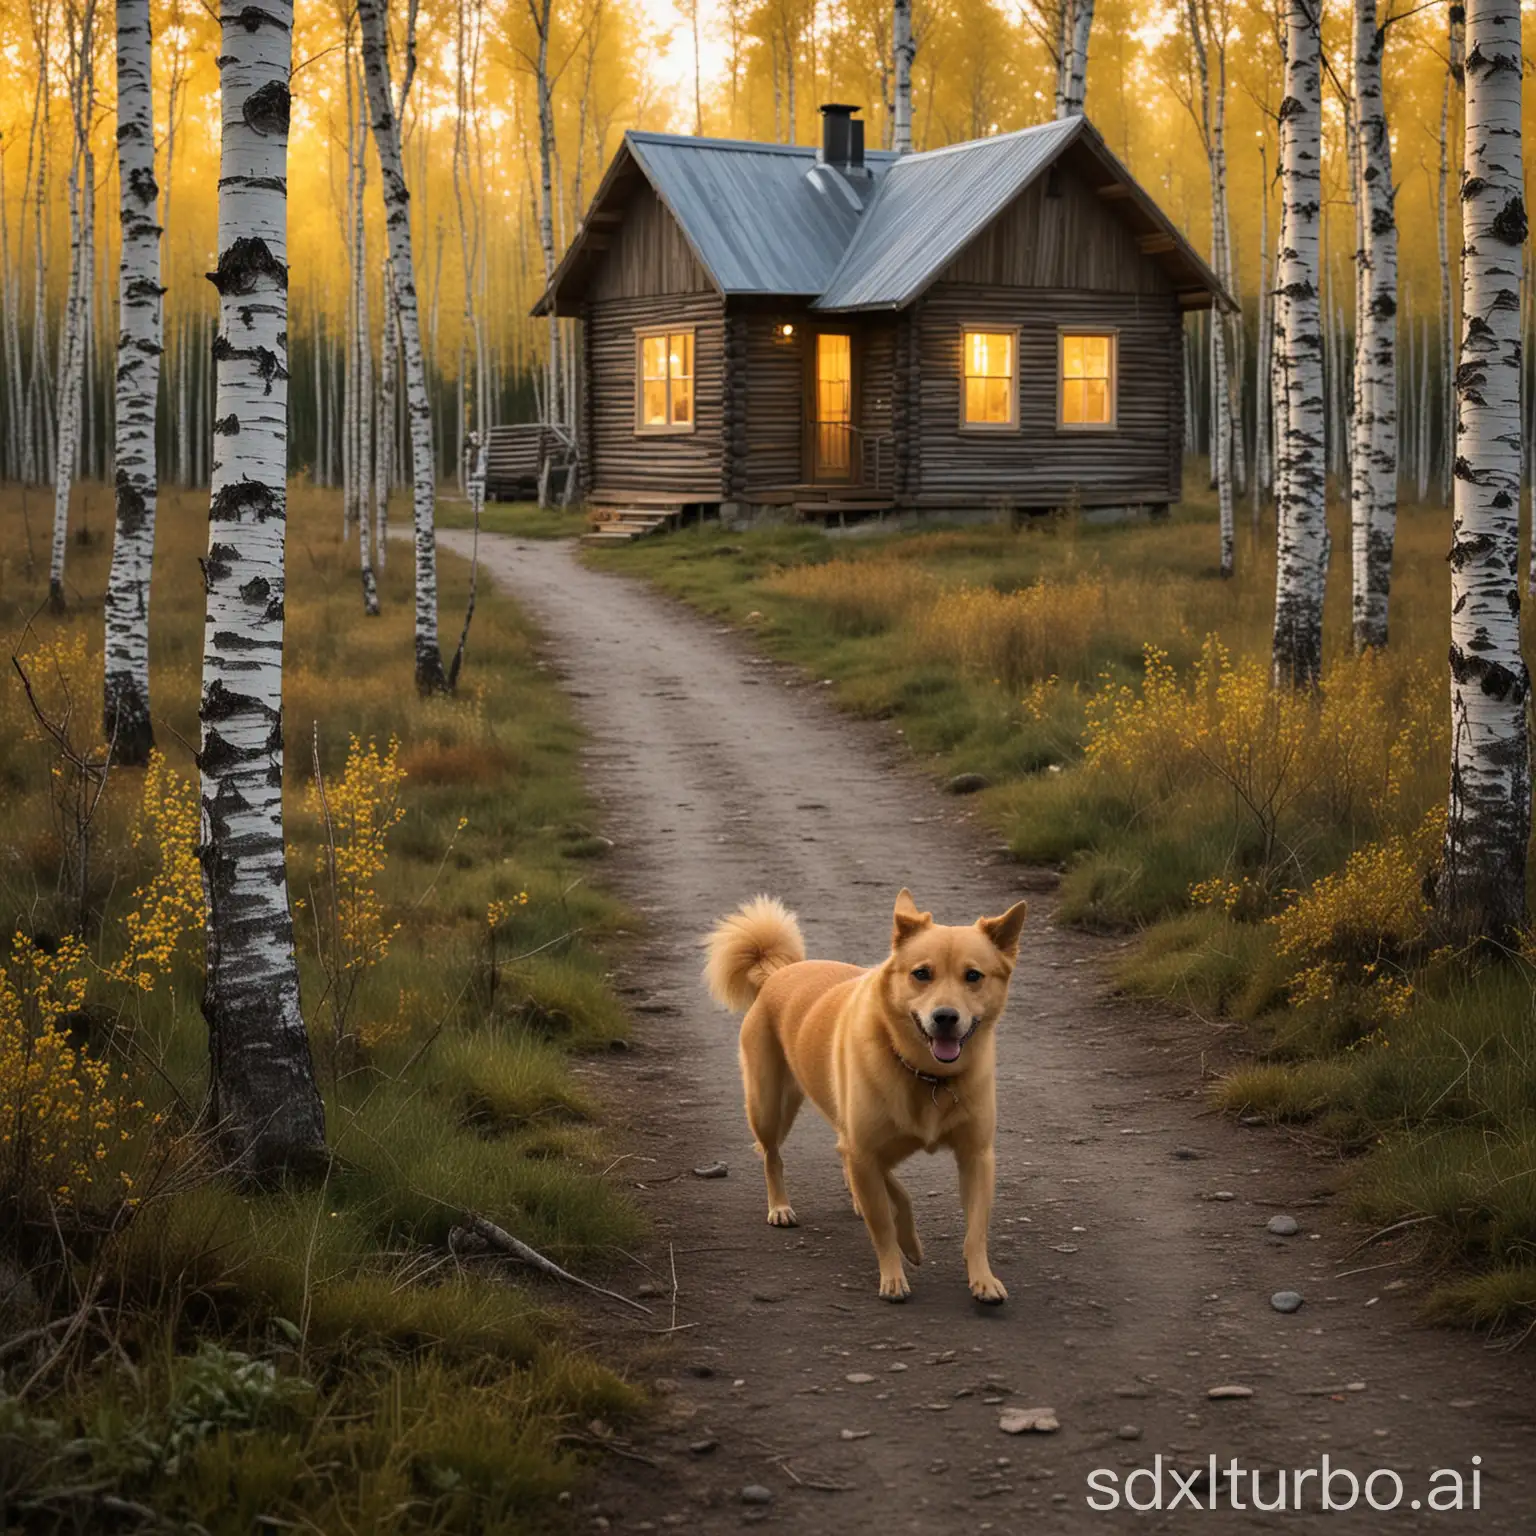 Twilight-Encounter-Little-Yellow-Dog-Running-to-Girl-by-Birch-Forest-Cabin